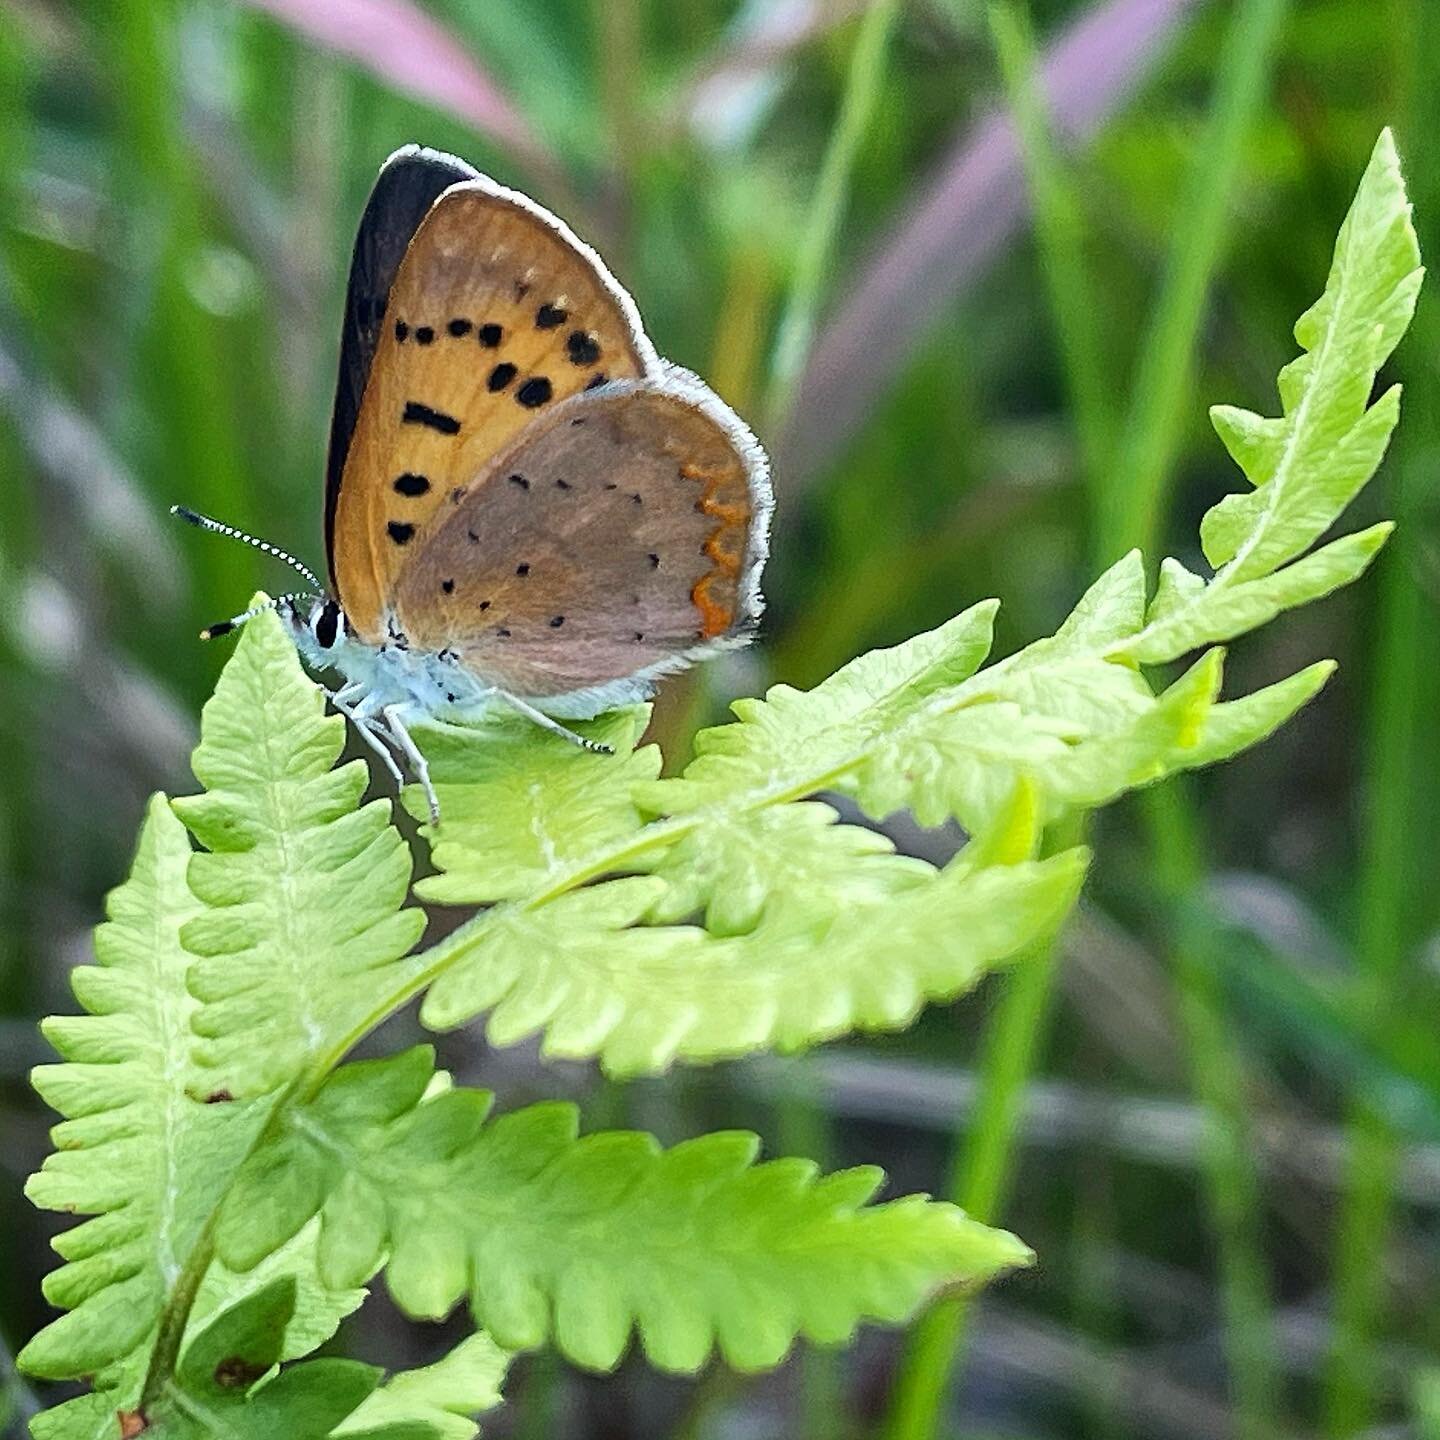 🧡 Dorcas copper (Lycaena dorcas) 🧡

Saw a handful of these beautiful little butterflies flying around a prairie fen habitat in Springfield Township yesterday. Larval host plants include shrubby cinquefoil and weedy Rumex and Polygonum species. 

#b